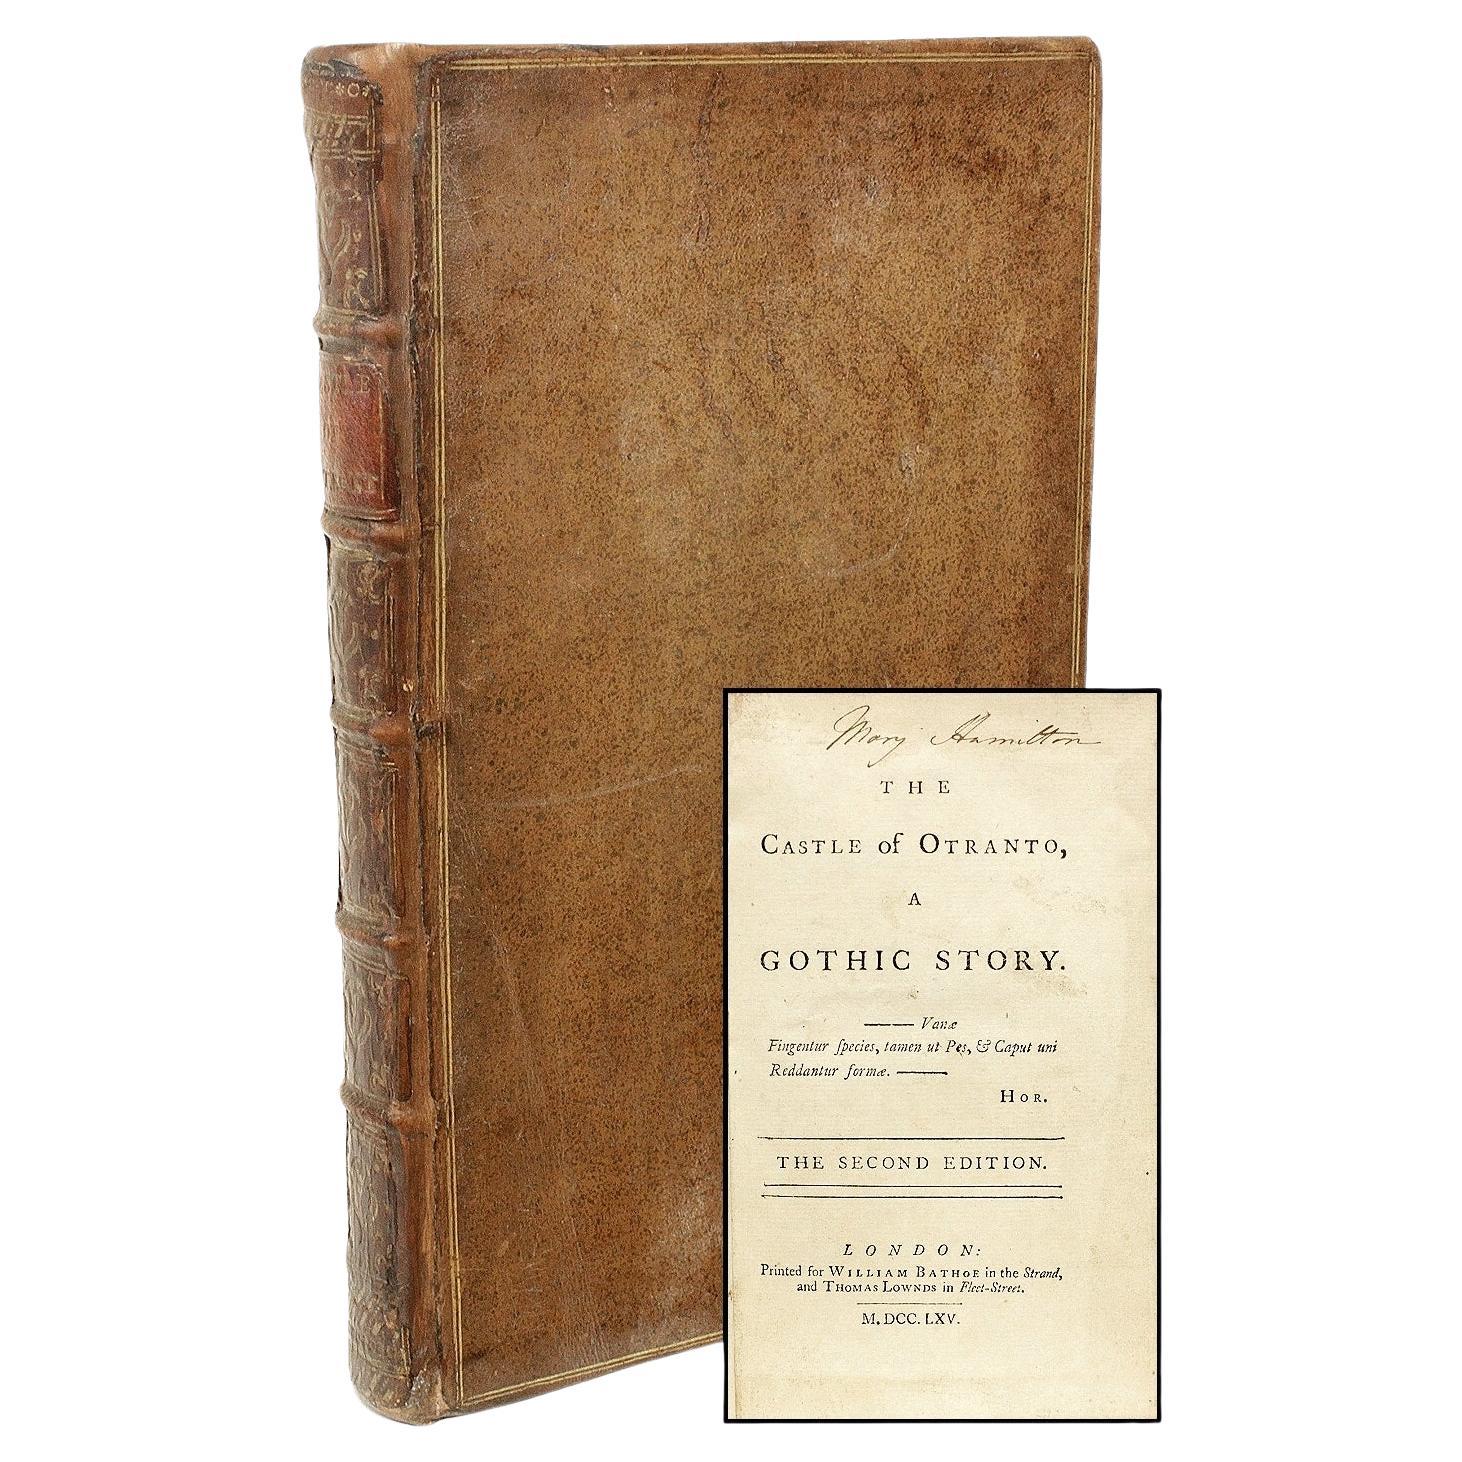 Horace WALPOLE. The Castle Of Otranto, A Gothic Story. SECOND EDITION - 1765 For Sale